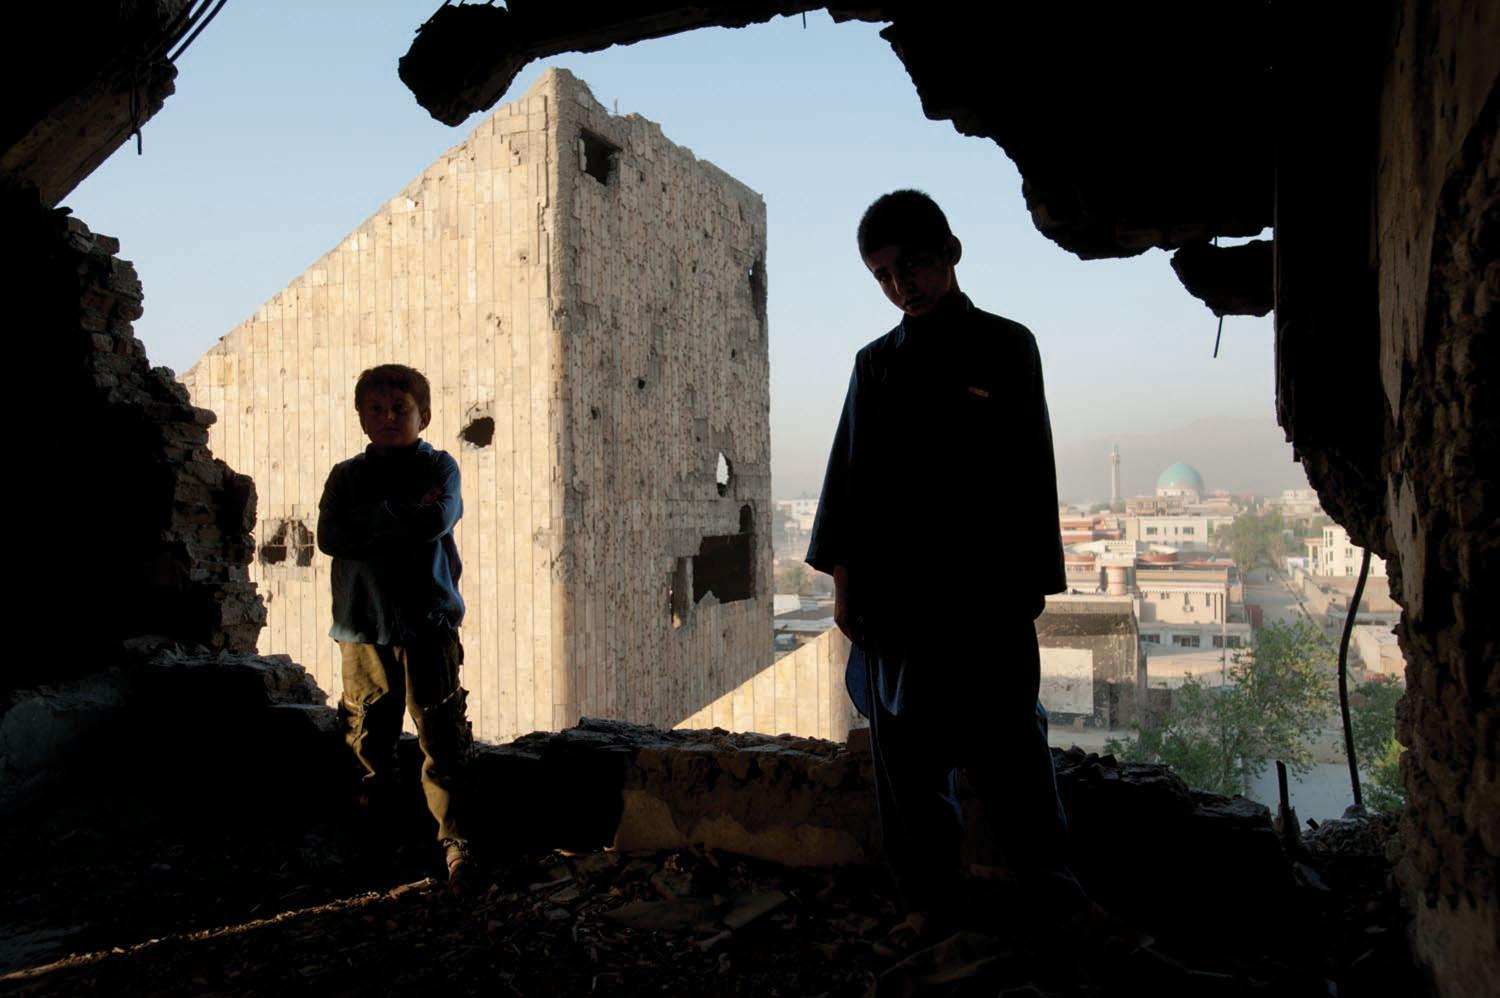 Sherifullah, eleven, and Abdel Basit, eight, stand on one of the upper floors of the Russian Palace of Culture, which was heavily shelled during the mujahidin civil war that followed the Soviet withdrawal. Until recently, the bombed out buildings sheltered homeless Afghans and heroin addicts. Efforts by the Russian government to rehabilitate the cultural center are underway.